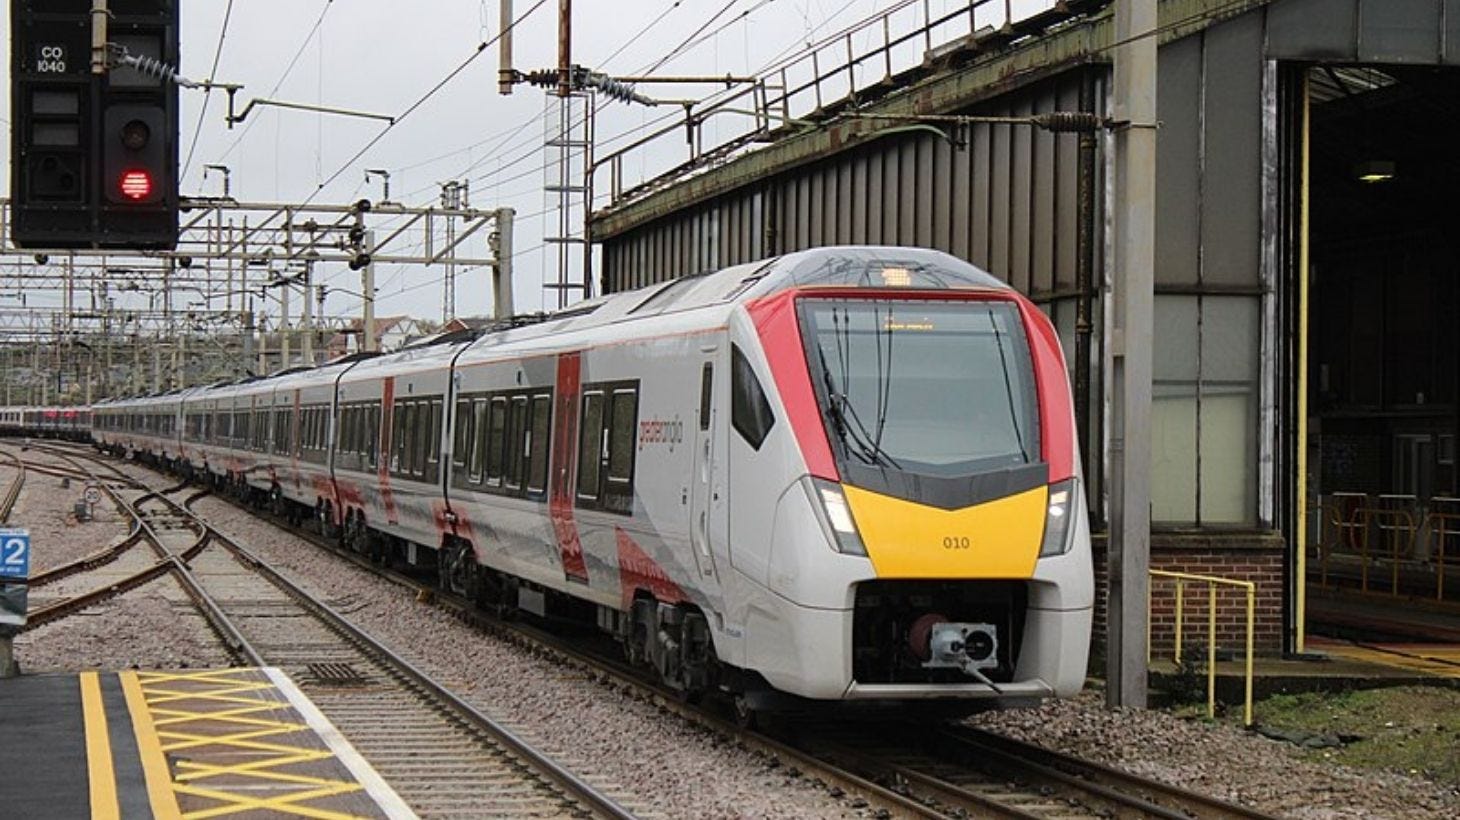 Greater Anglia's 745010 'FLIRT' arrives into Colchester working a Liverpool Street - Norwich service.©SavageKieran